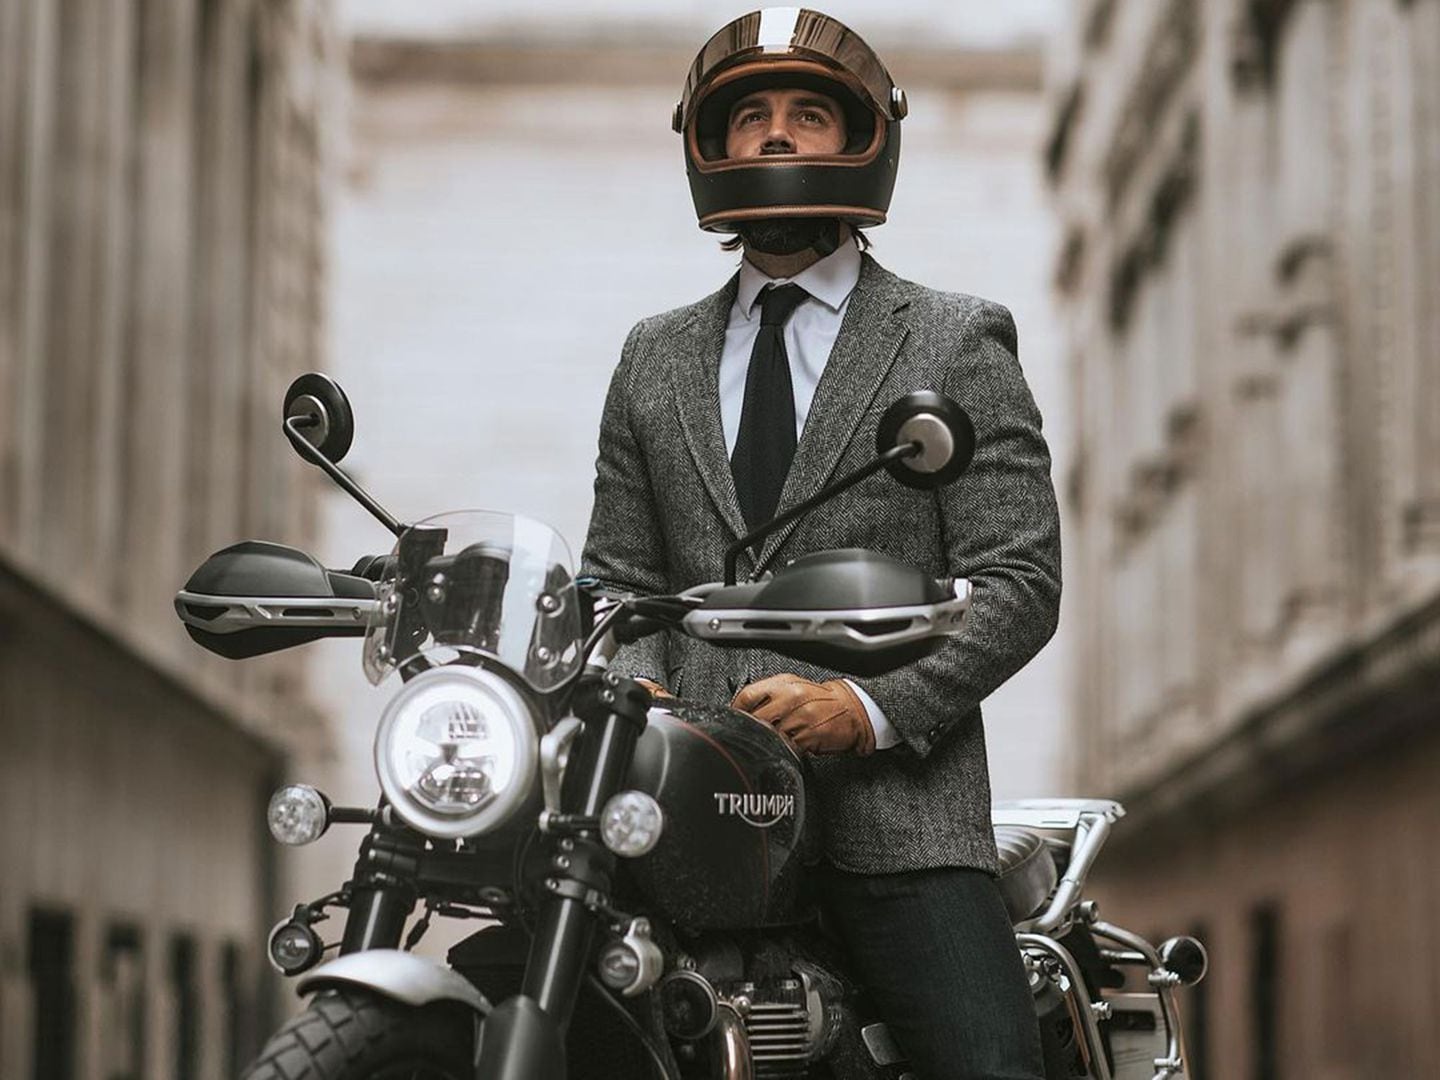 The Best Dressed Men on Motorcycles Ride Again